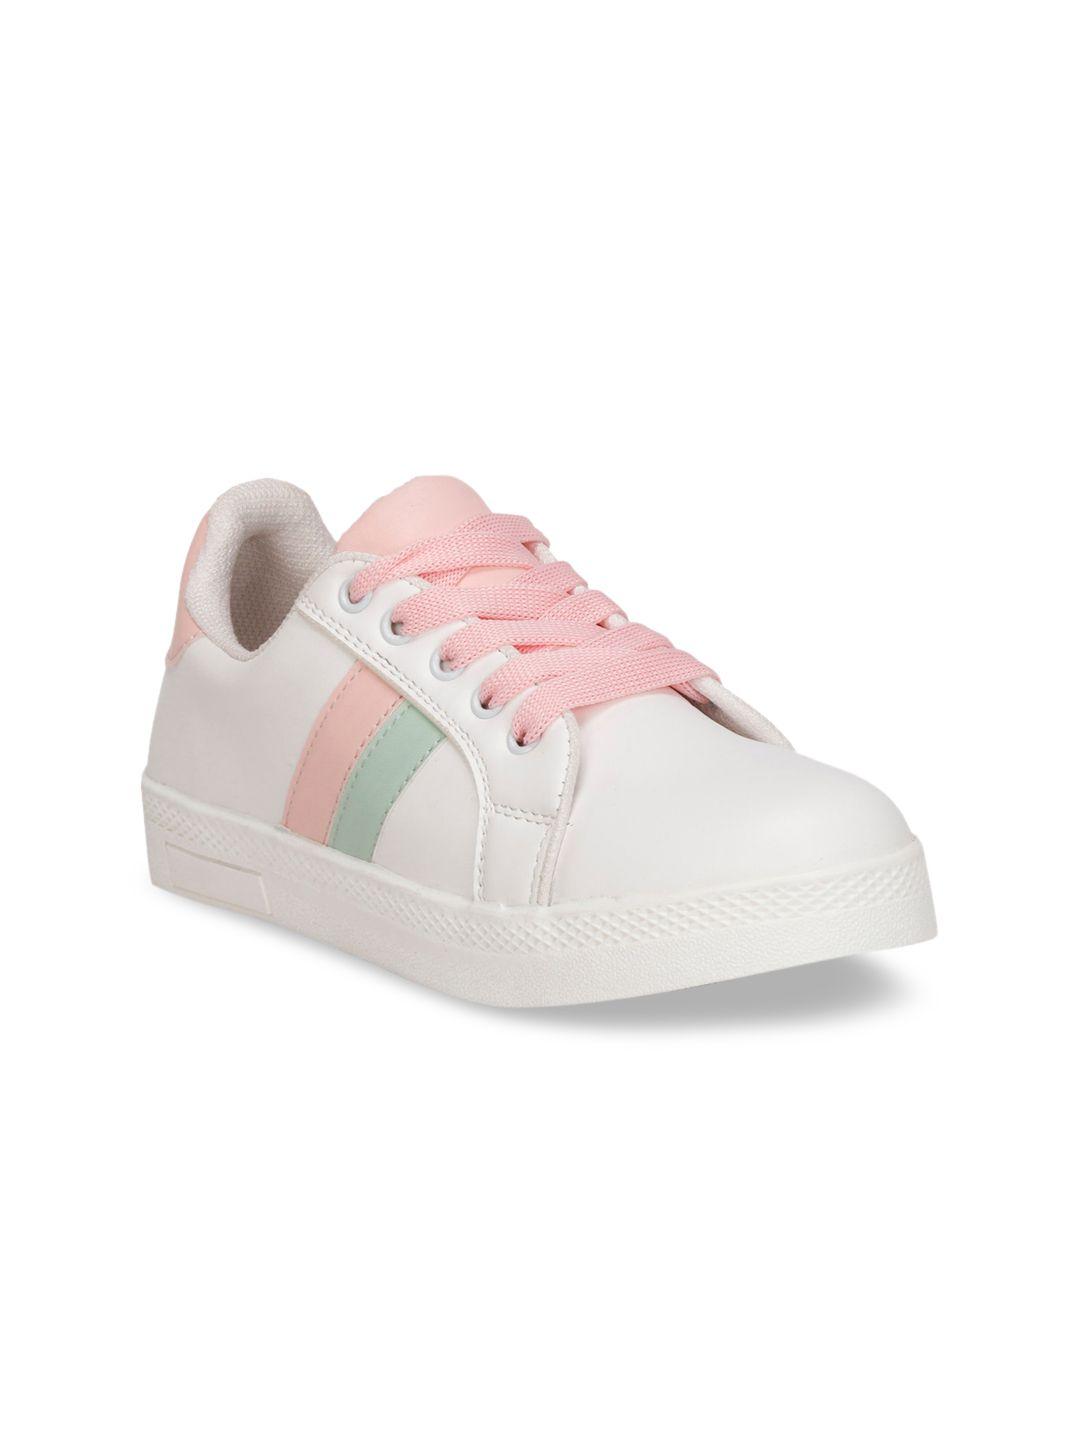 denill women pink lace up sneakers